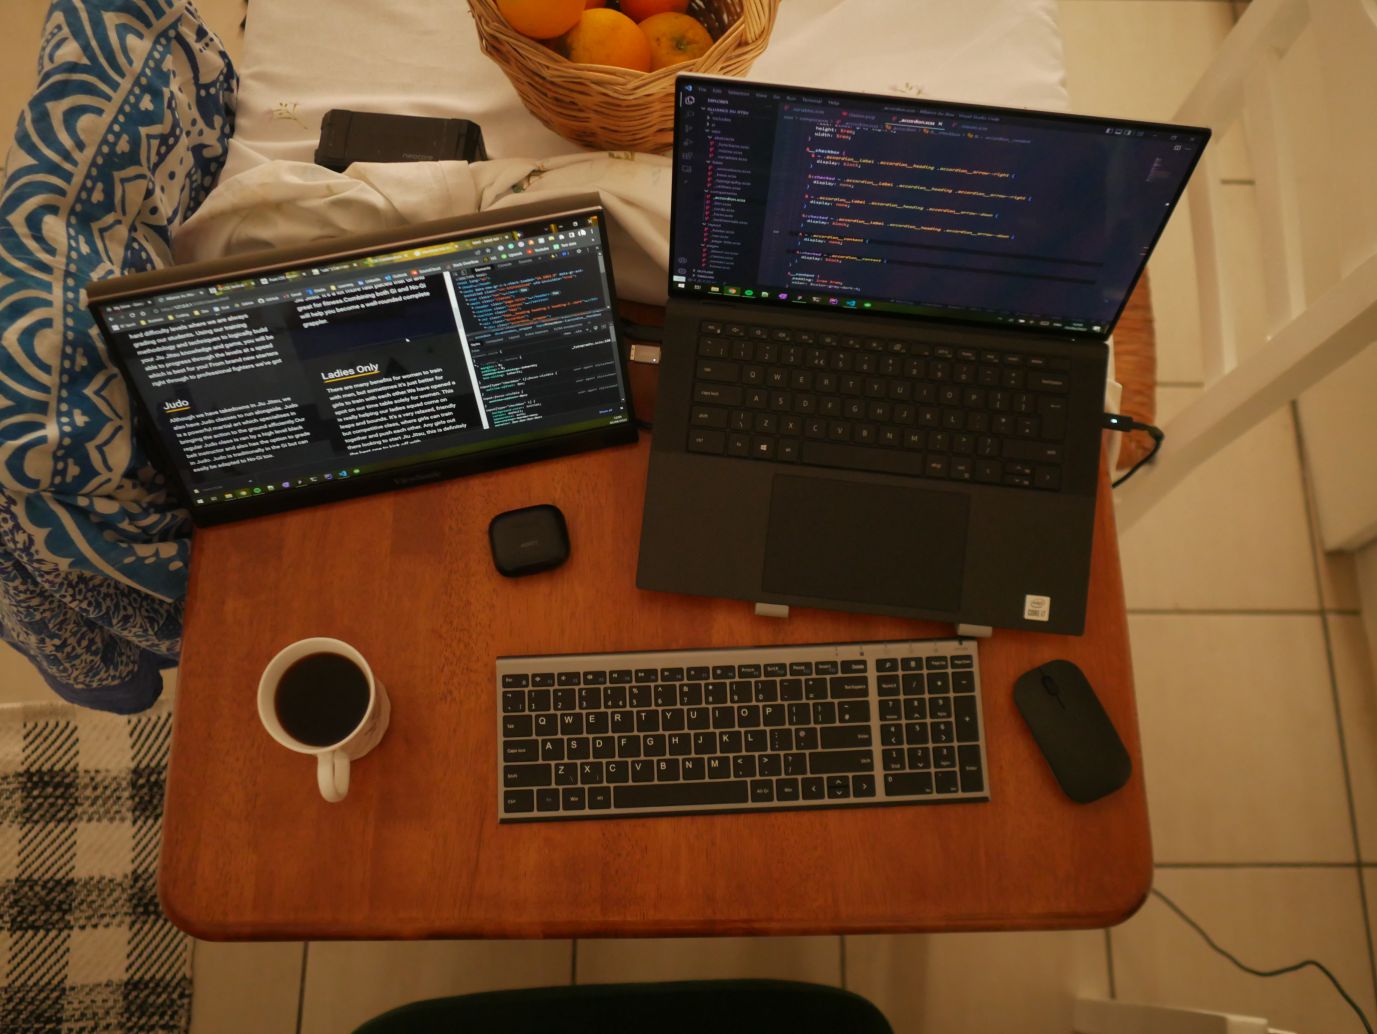 Lucian Chevallier's desk setup while trying out the digital nomad lifestyle. A laptop, portable second screen and wireless keyboard and mouse.